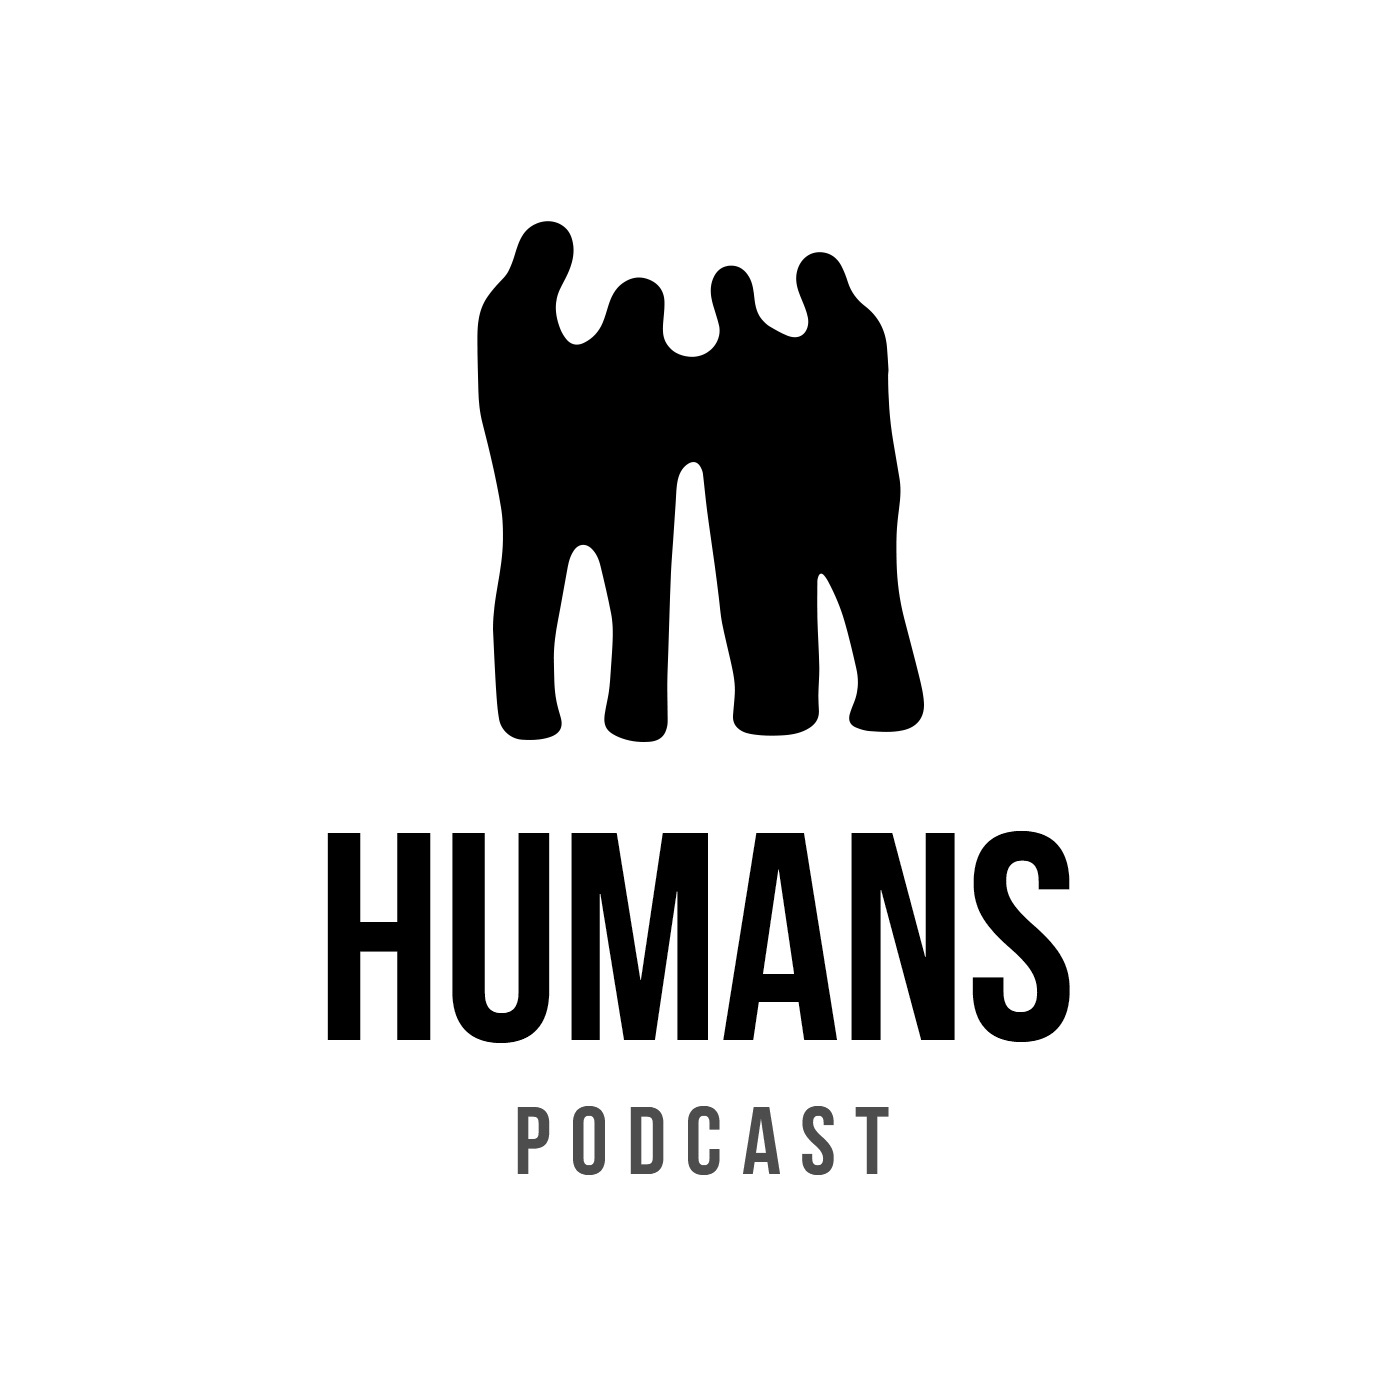 HUMANS podcast